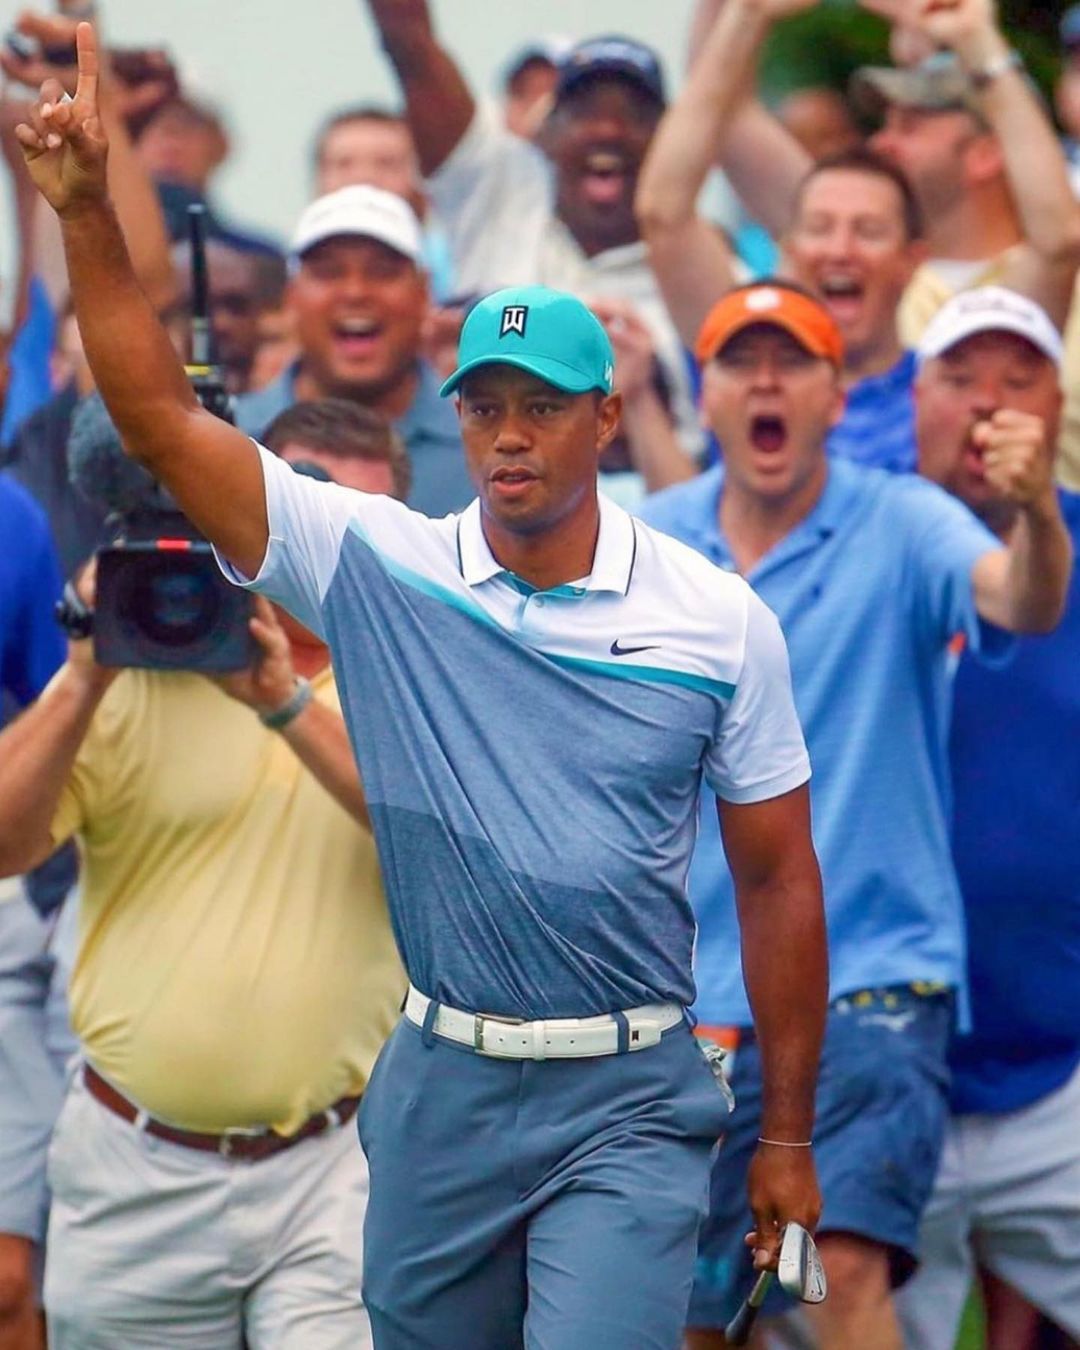 Tiger Woods Holding His Hand Up While Playing Golf. Photo by Instagram user @wyndhamchamp